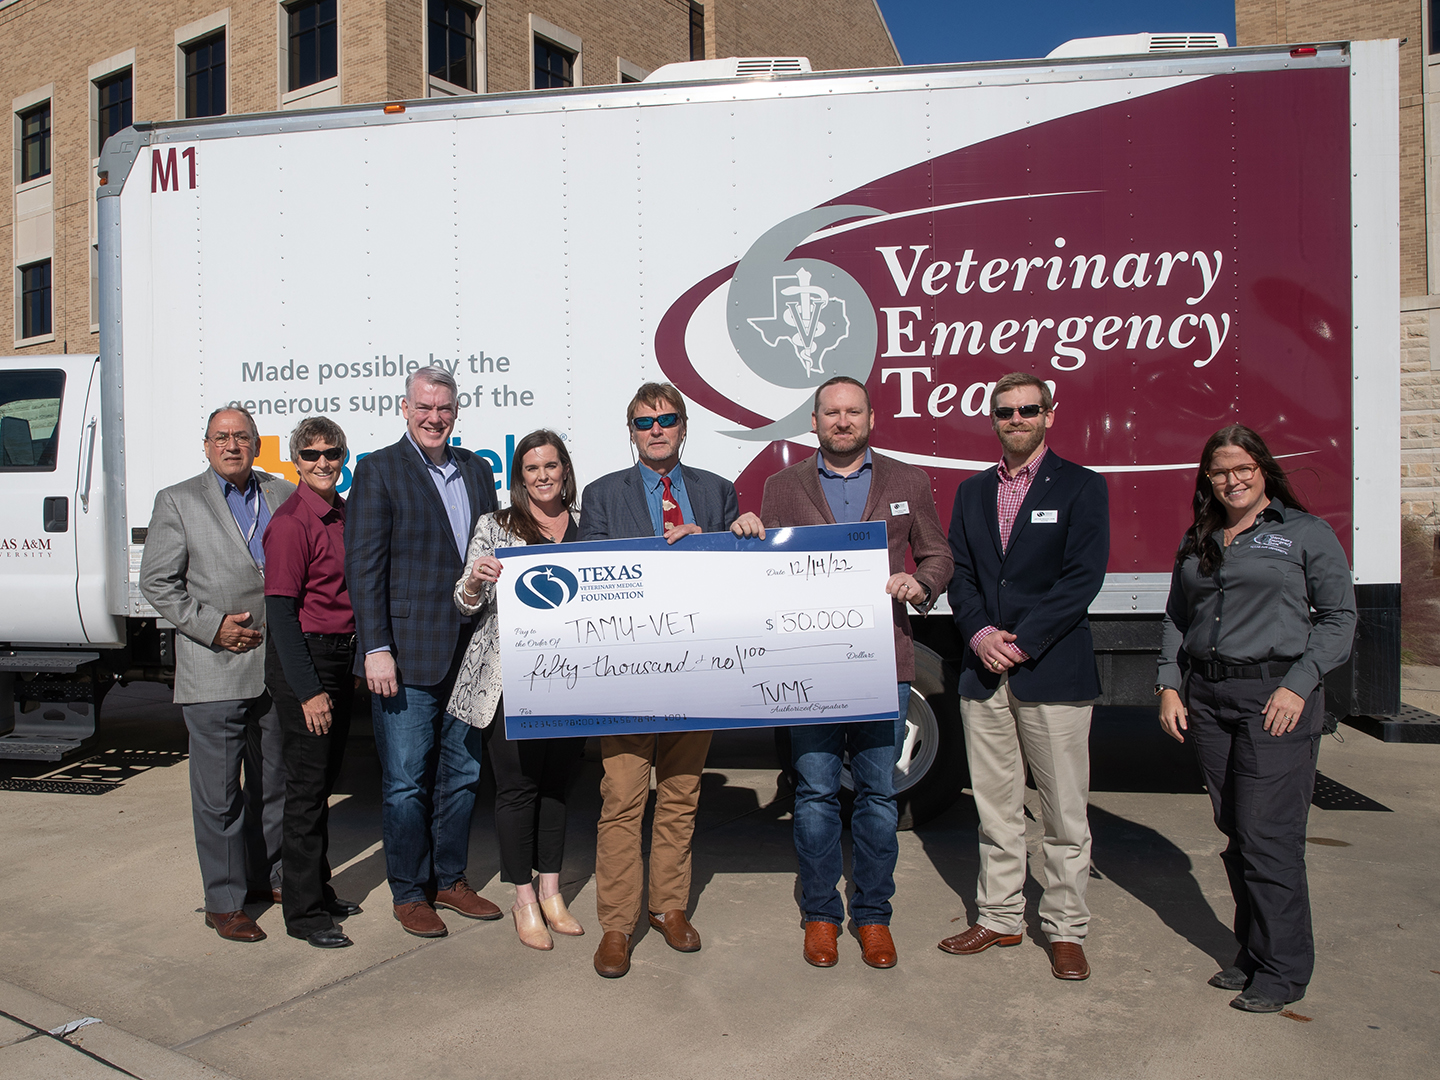 Members of the Texas A&M Veterinary Emergency Team and Texas Veterinary Medical Foundation holding a giant check for $50,000 in front of a VET trailer